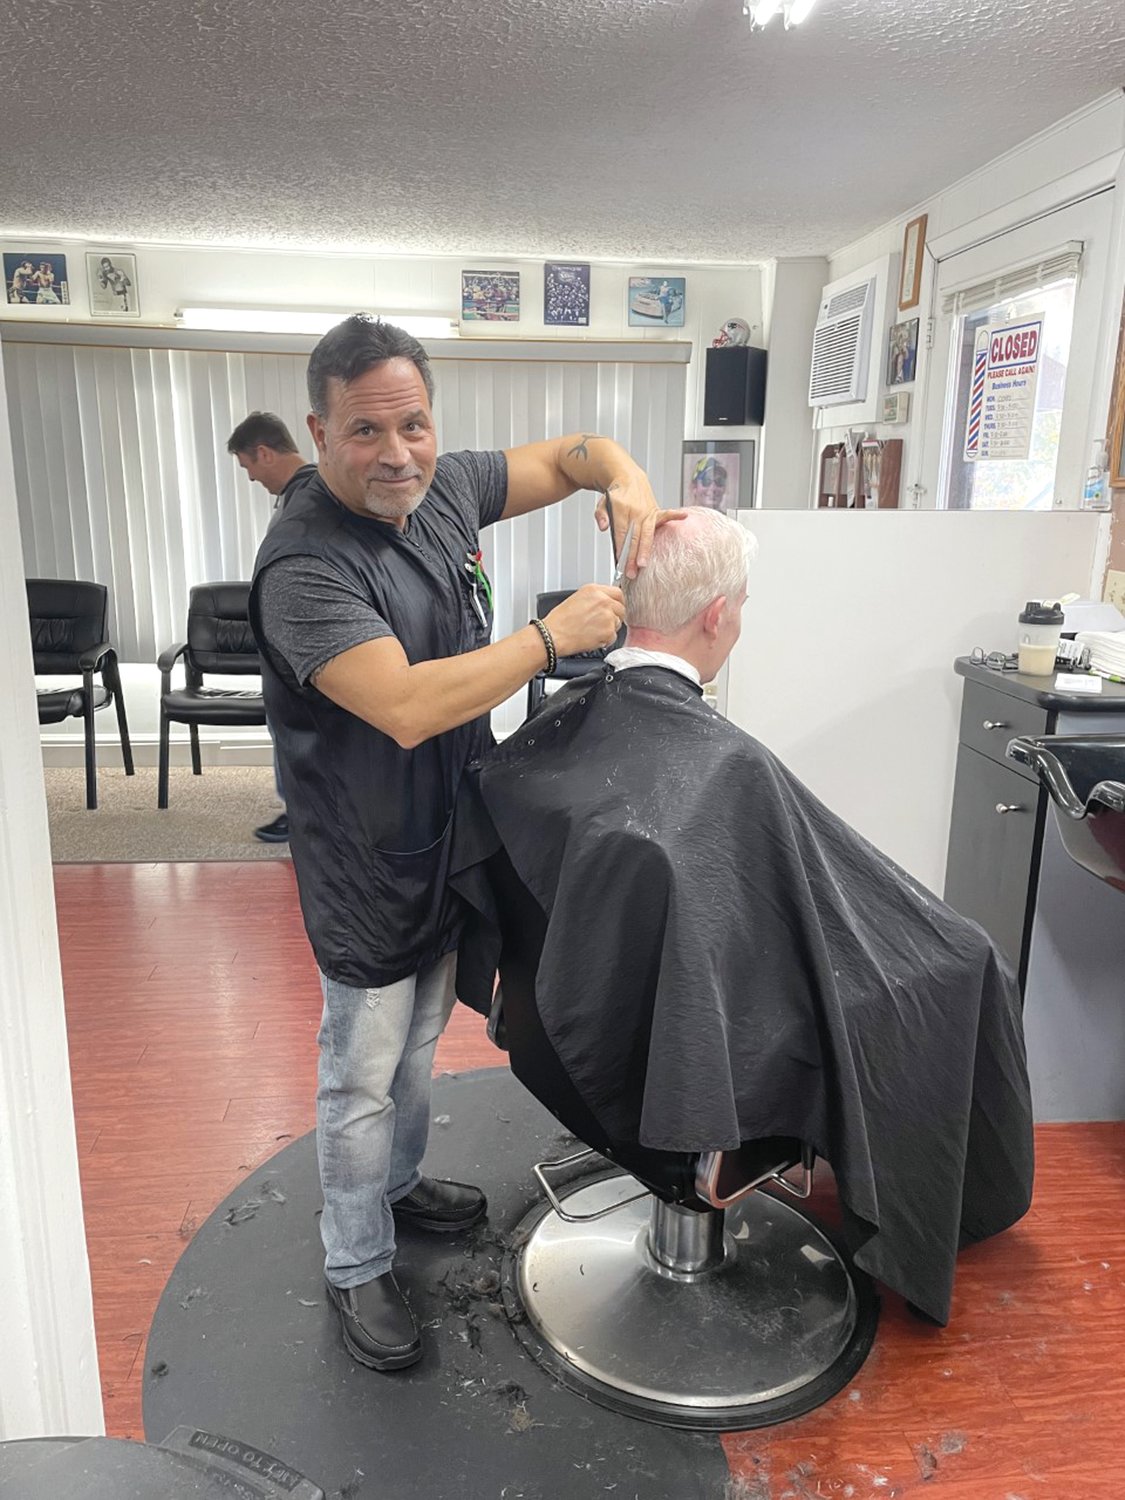 Dave Picozzi, the owner of David’s Greenwood Barber Shop, is seen here finishing up a cut on a customer who has been a loyal customer for over 14 years. David and his son Geno wish you and your families a happy, prosperous, and healthy New Year!